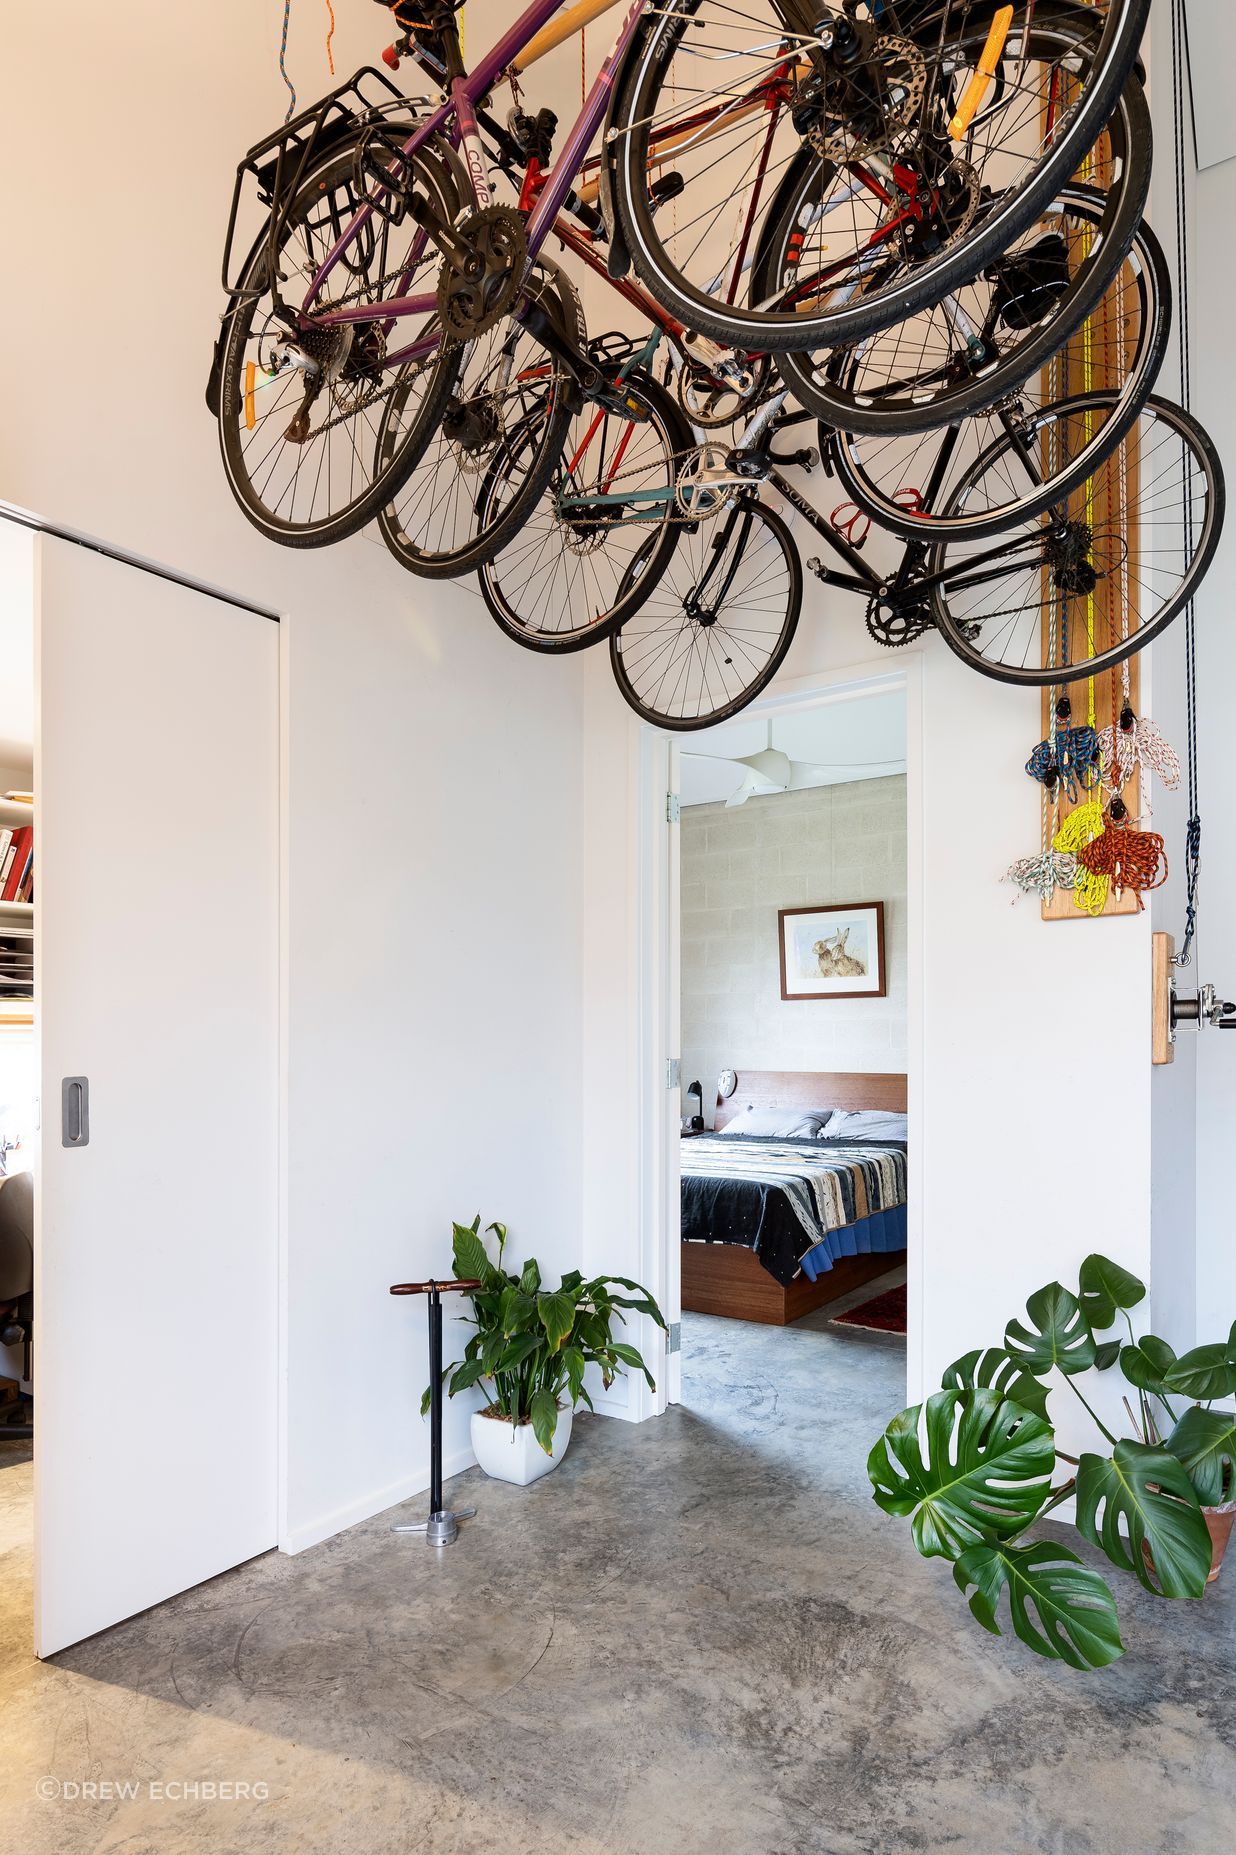 Bike storage in the entry hallway was important in the design of this new home